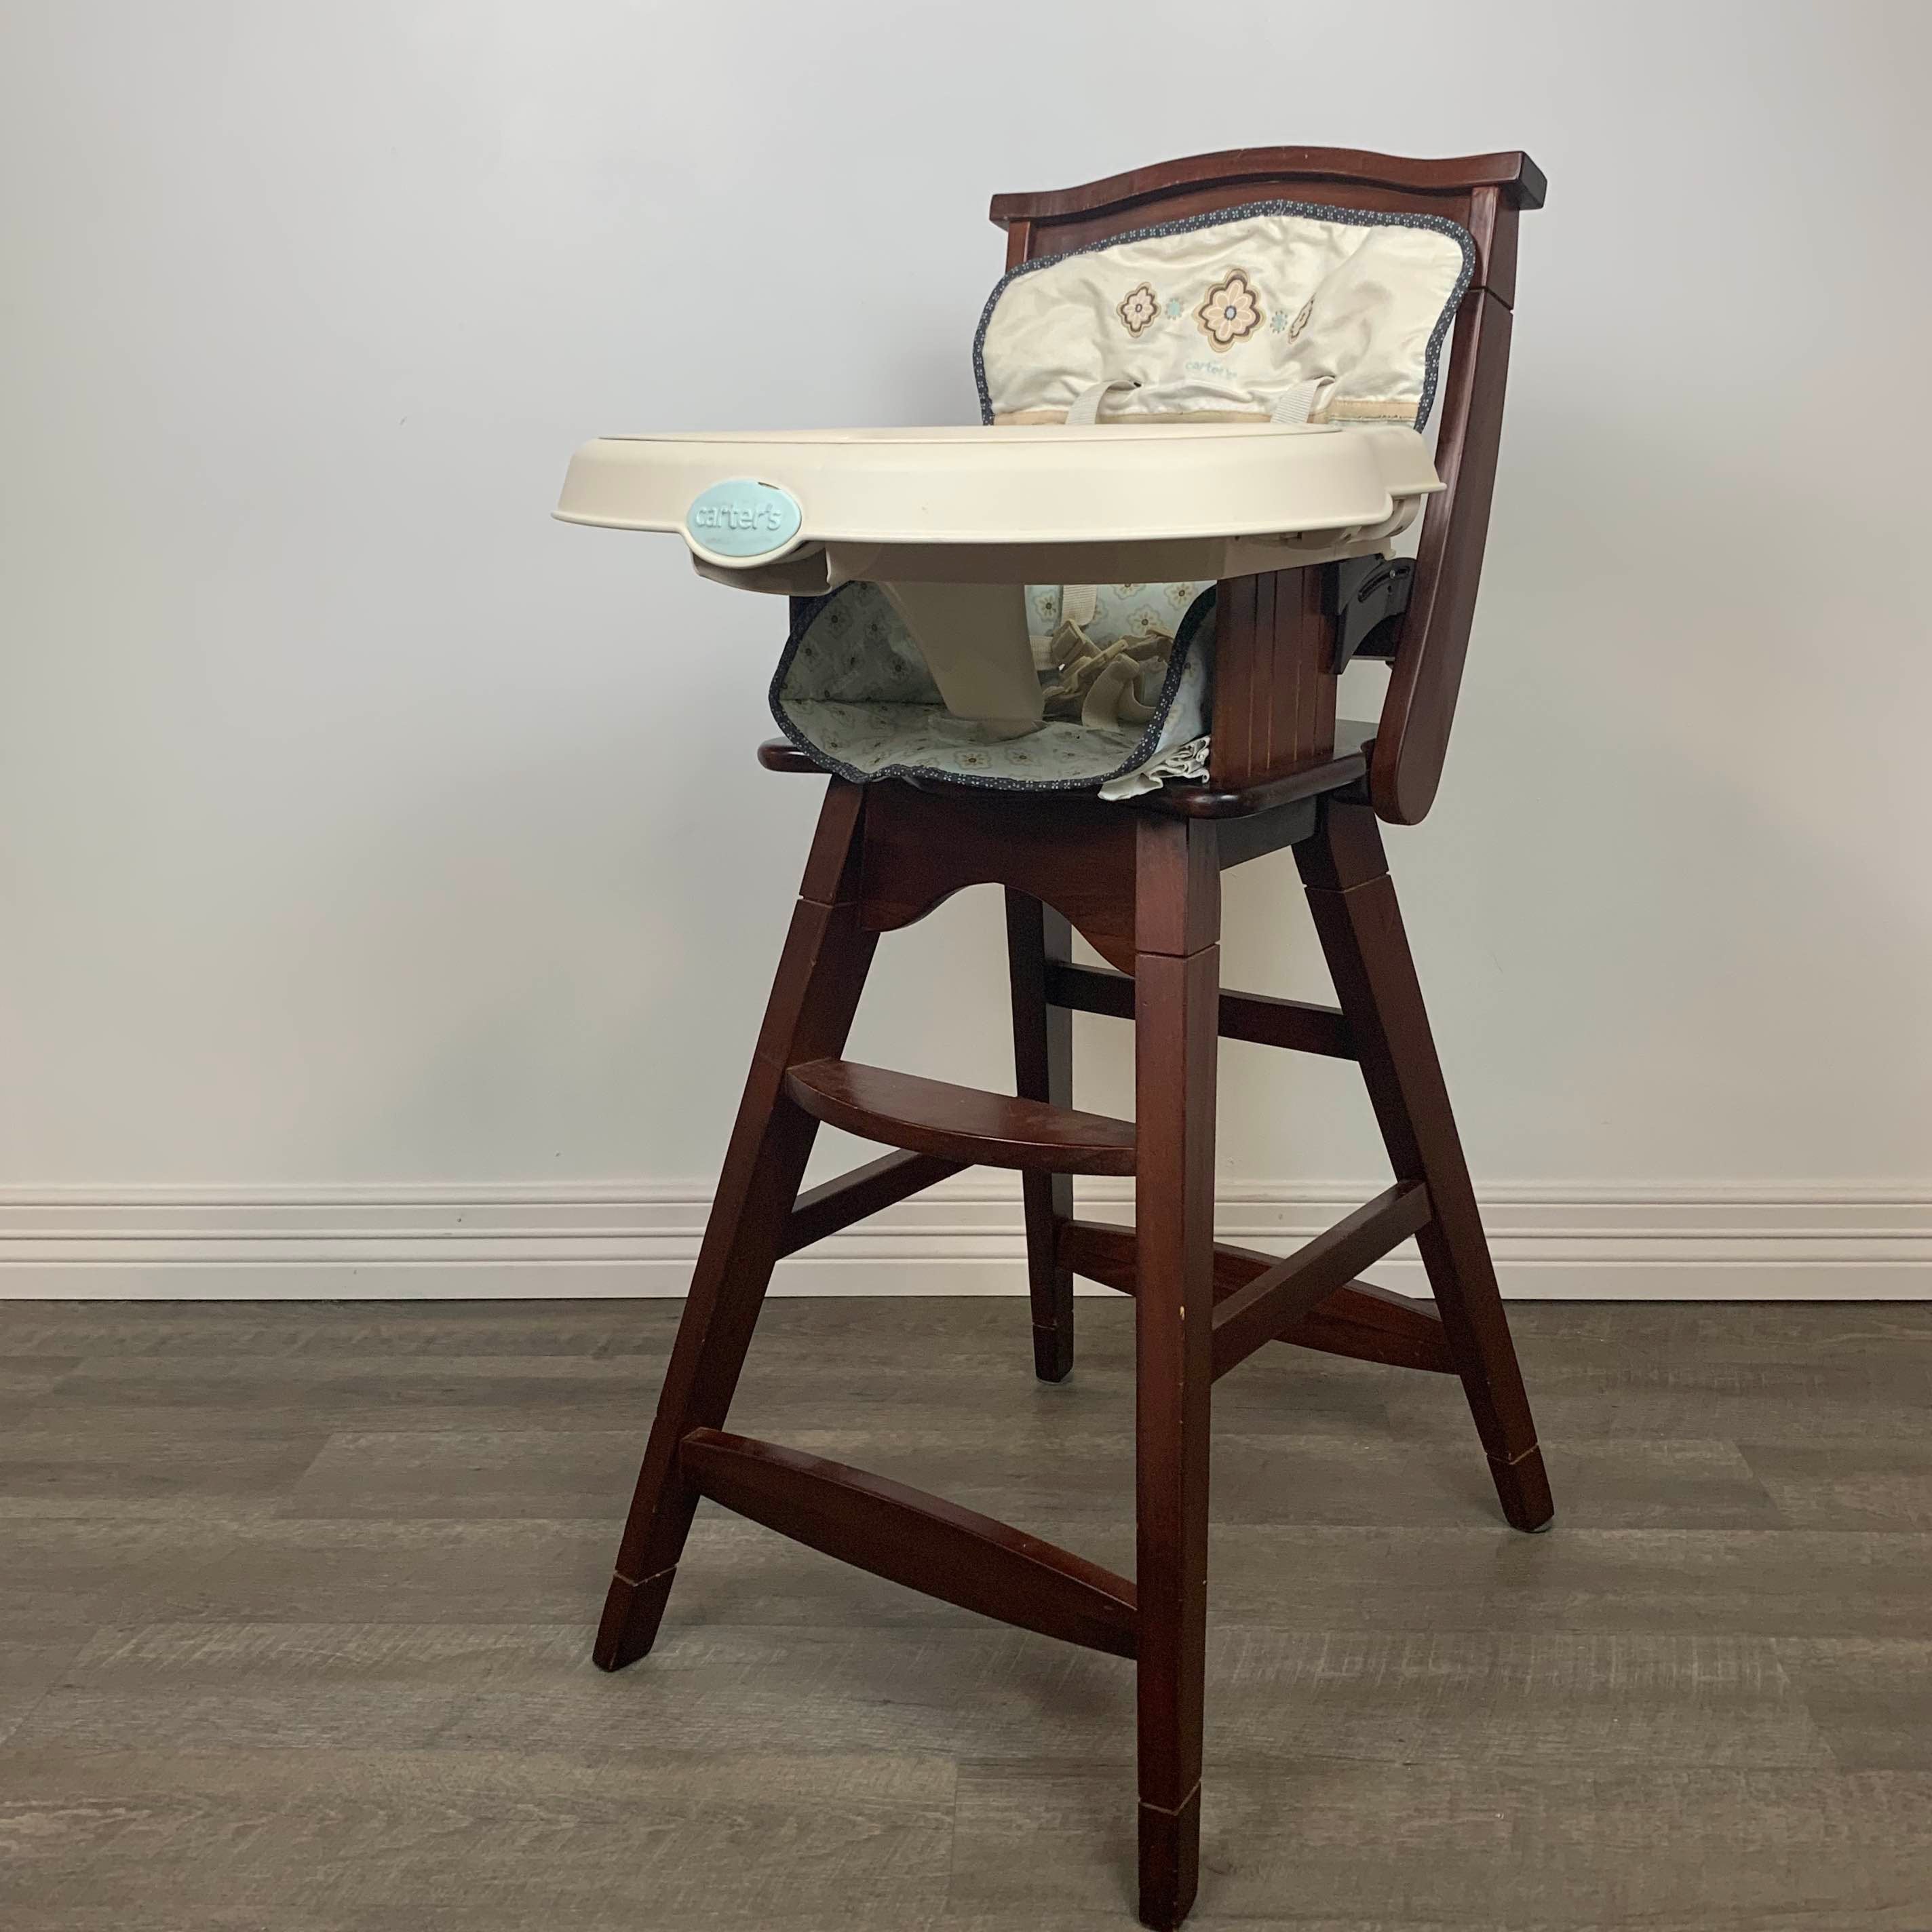 Carters Classic Comfort Wood High Chair